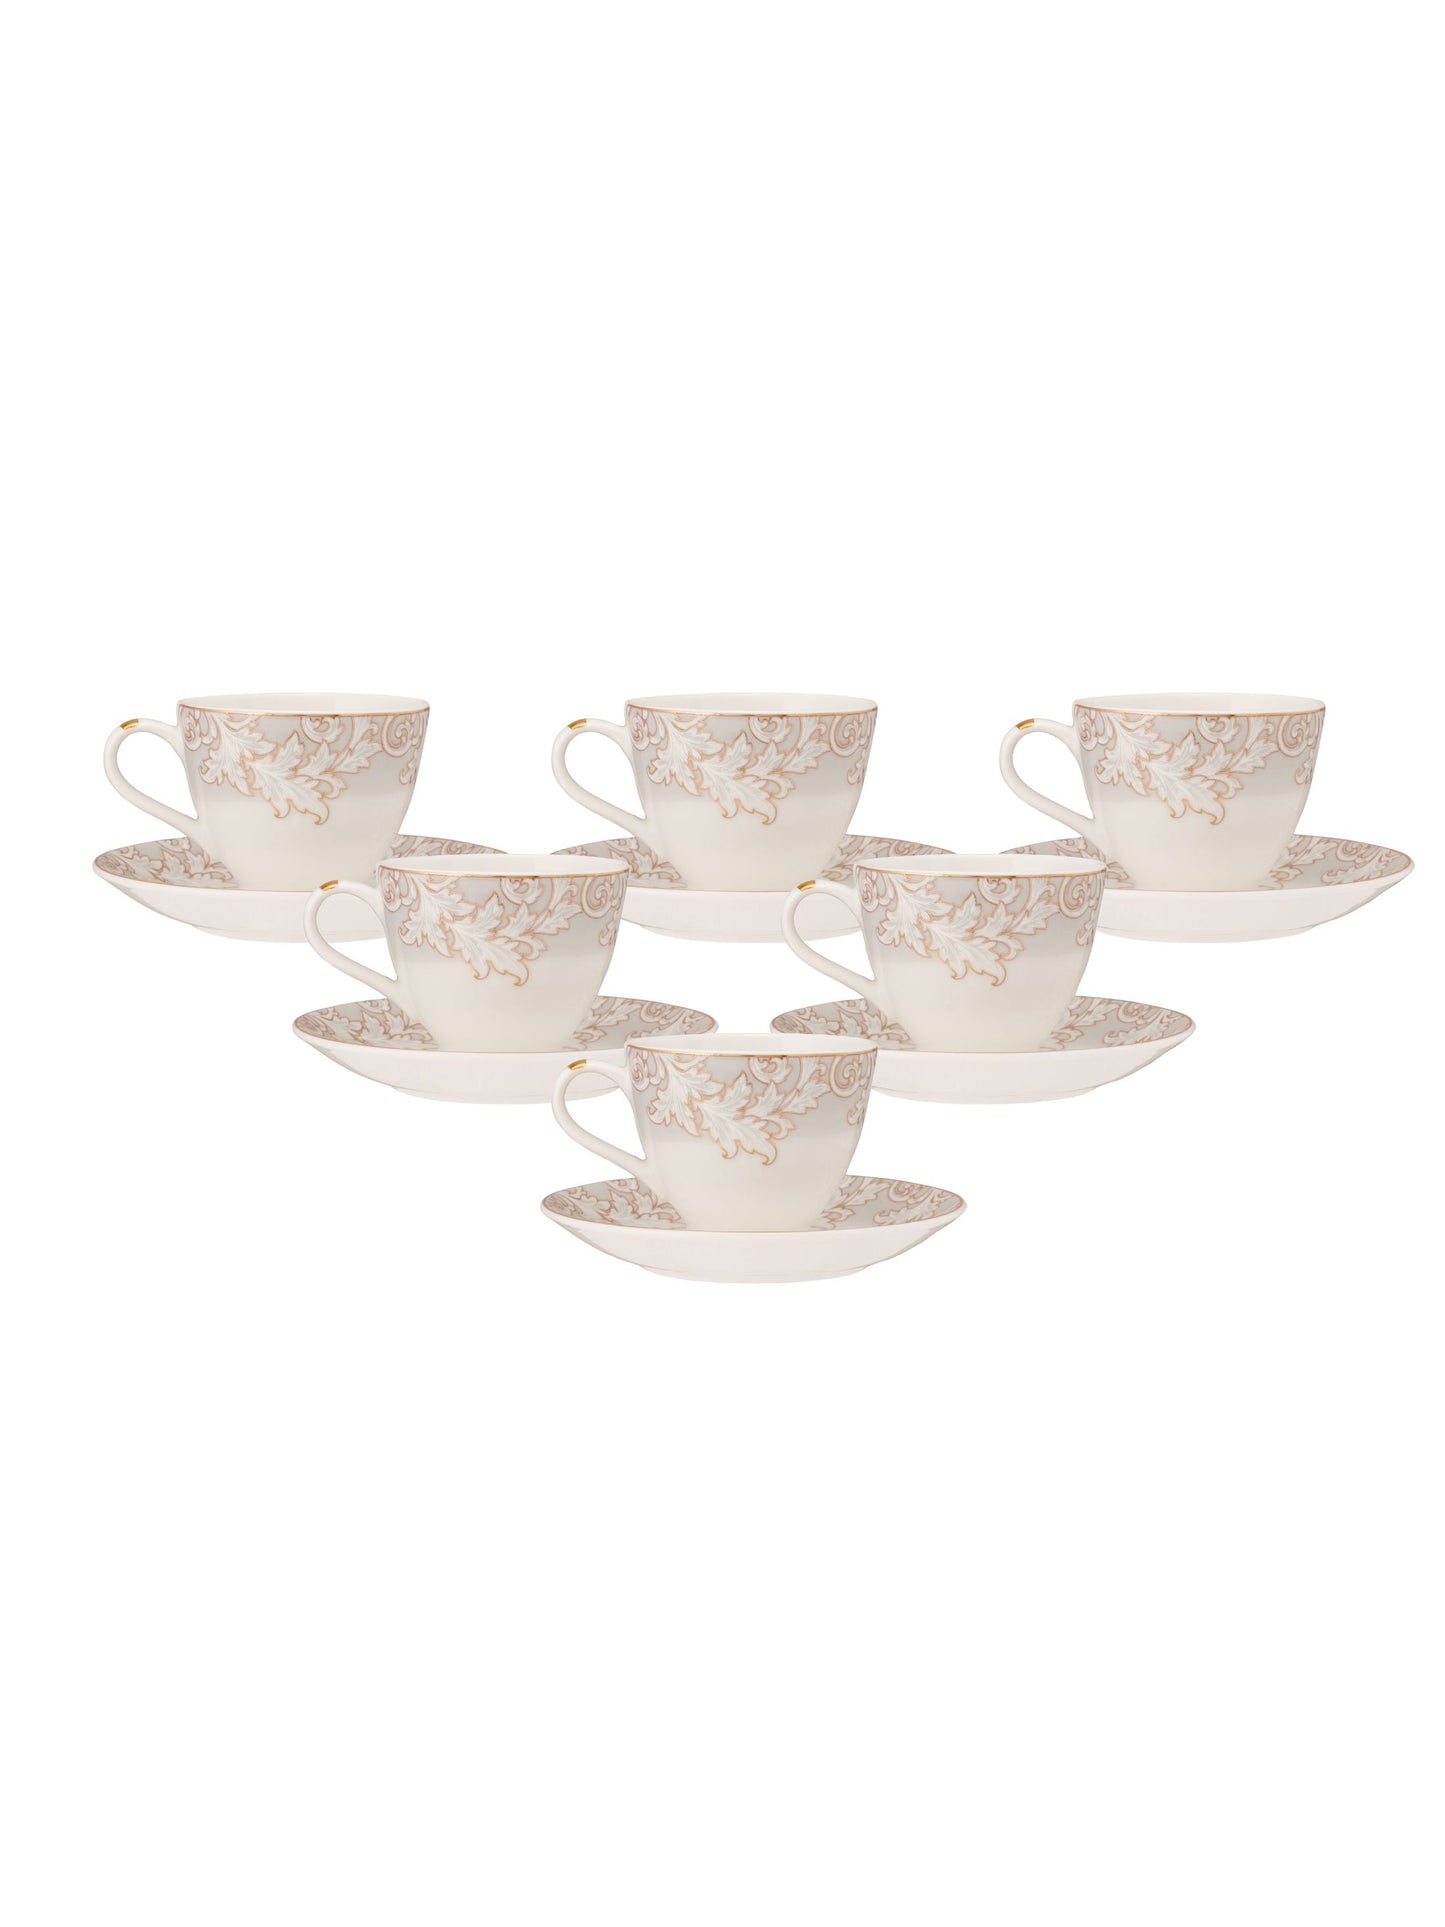 JCPL King Crysta Cup & Saucer, 160ml, Set of 12 (6 Cups + 6 Saucers) (CR401)